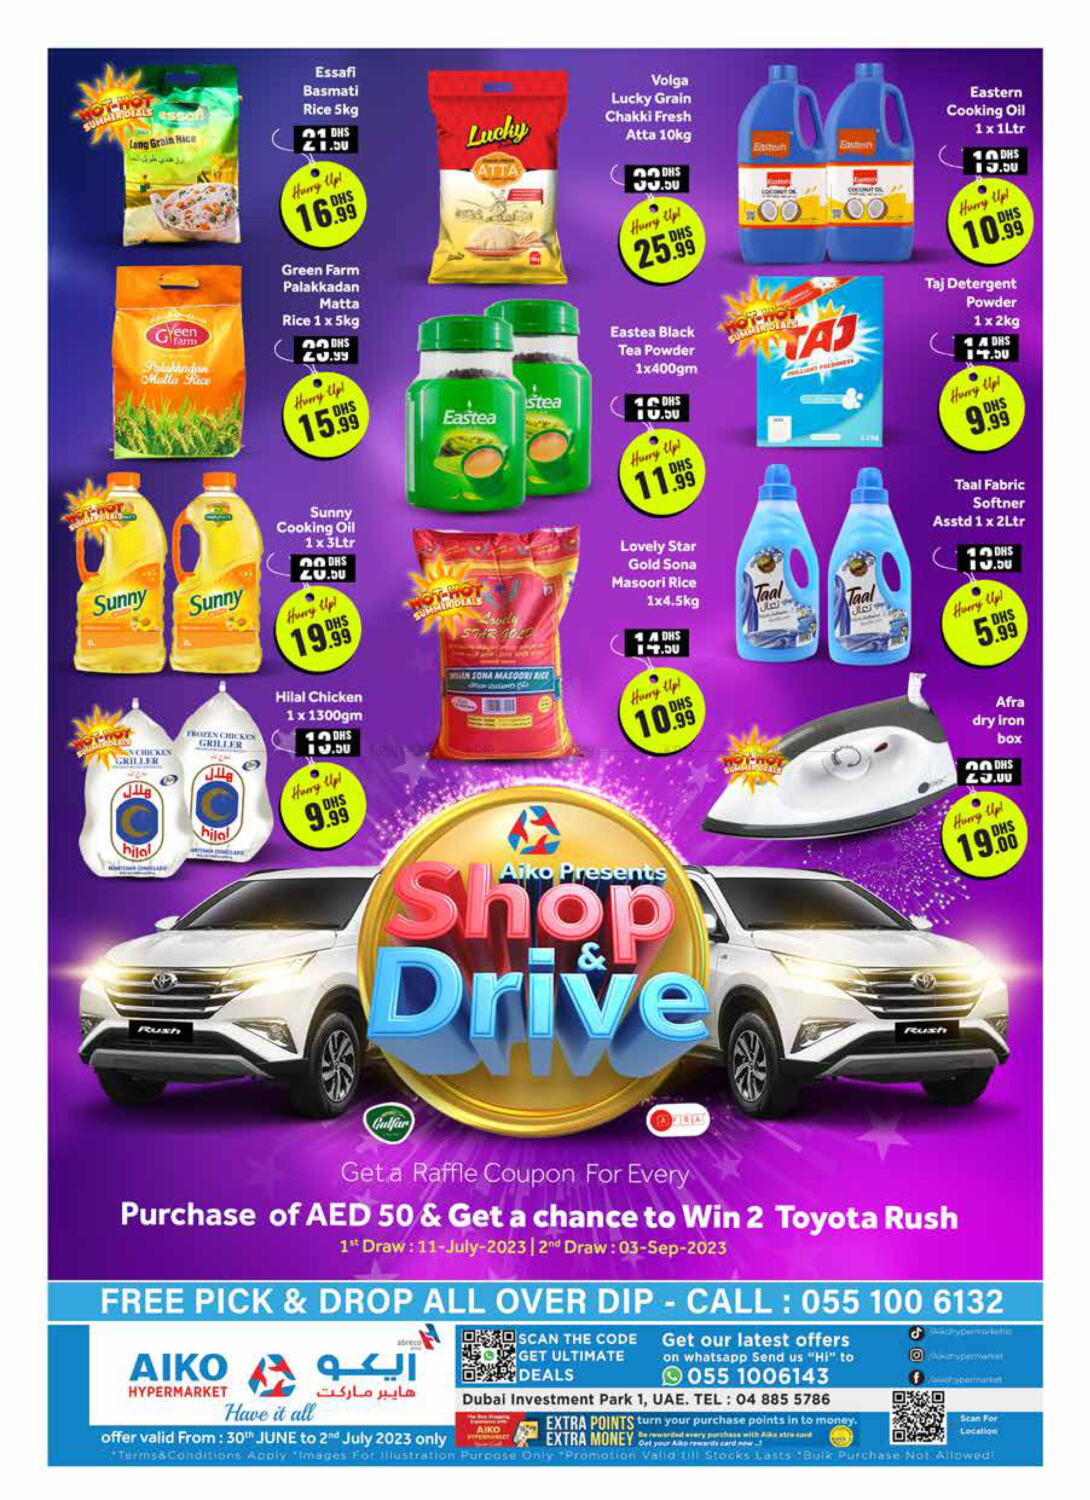 AIKO MALL AND AIKO HYPERMARKET OFFERS